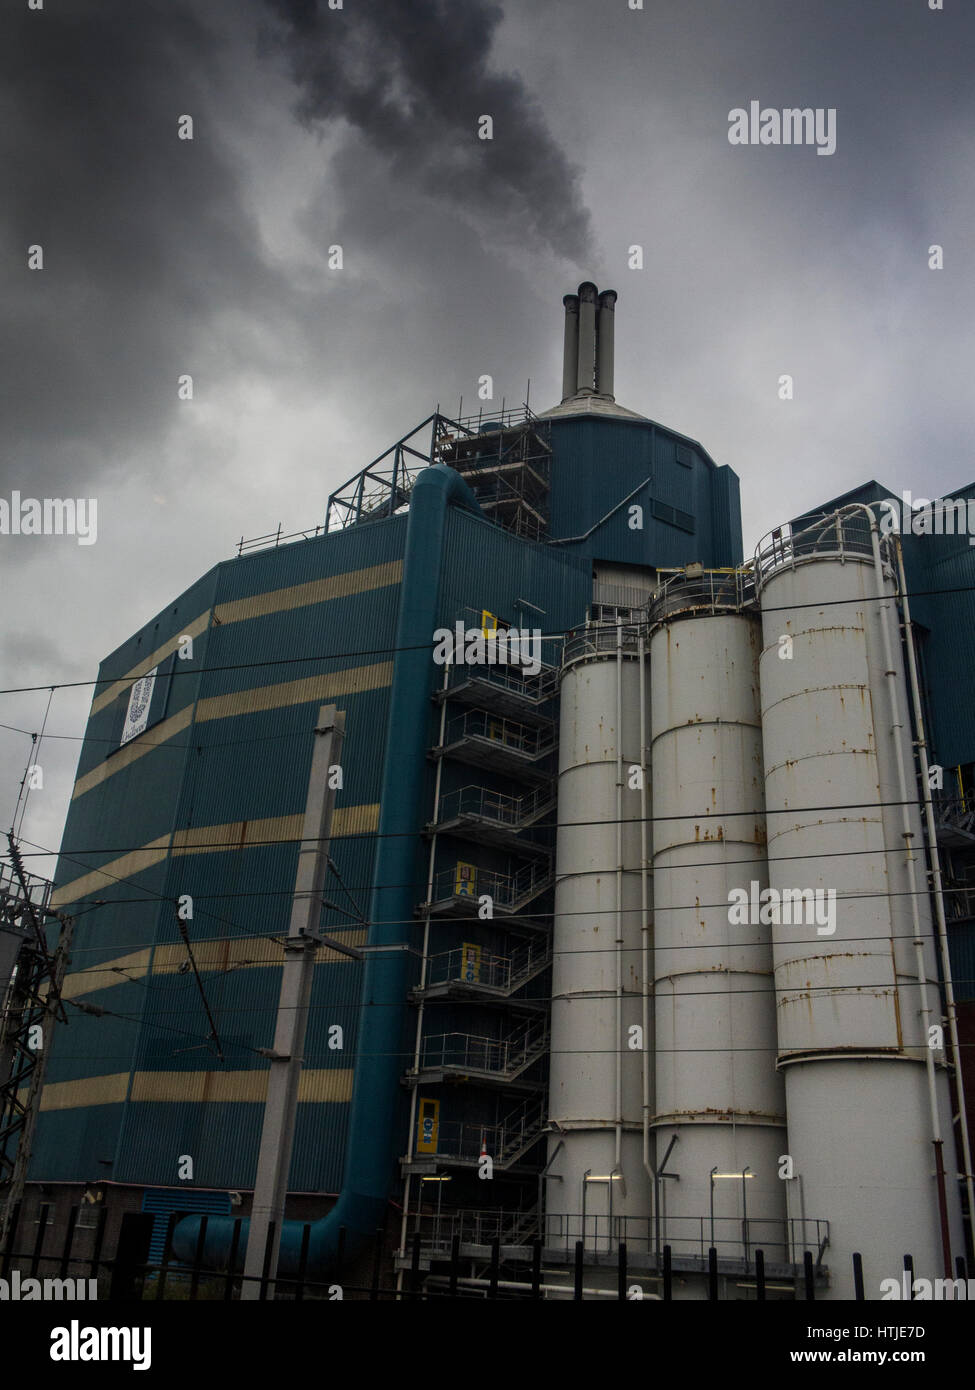 Unilever's detergent plant emits clouds of pollution Stock Photo